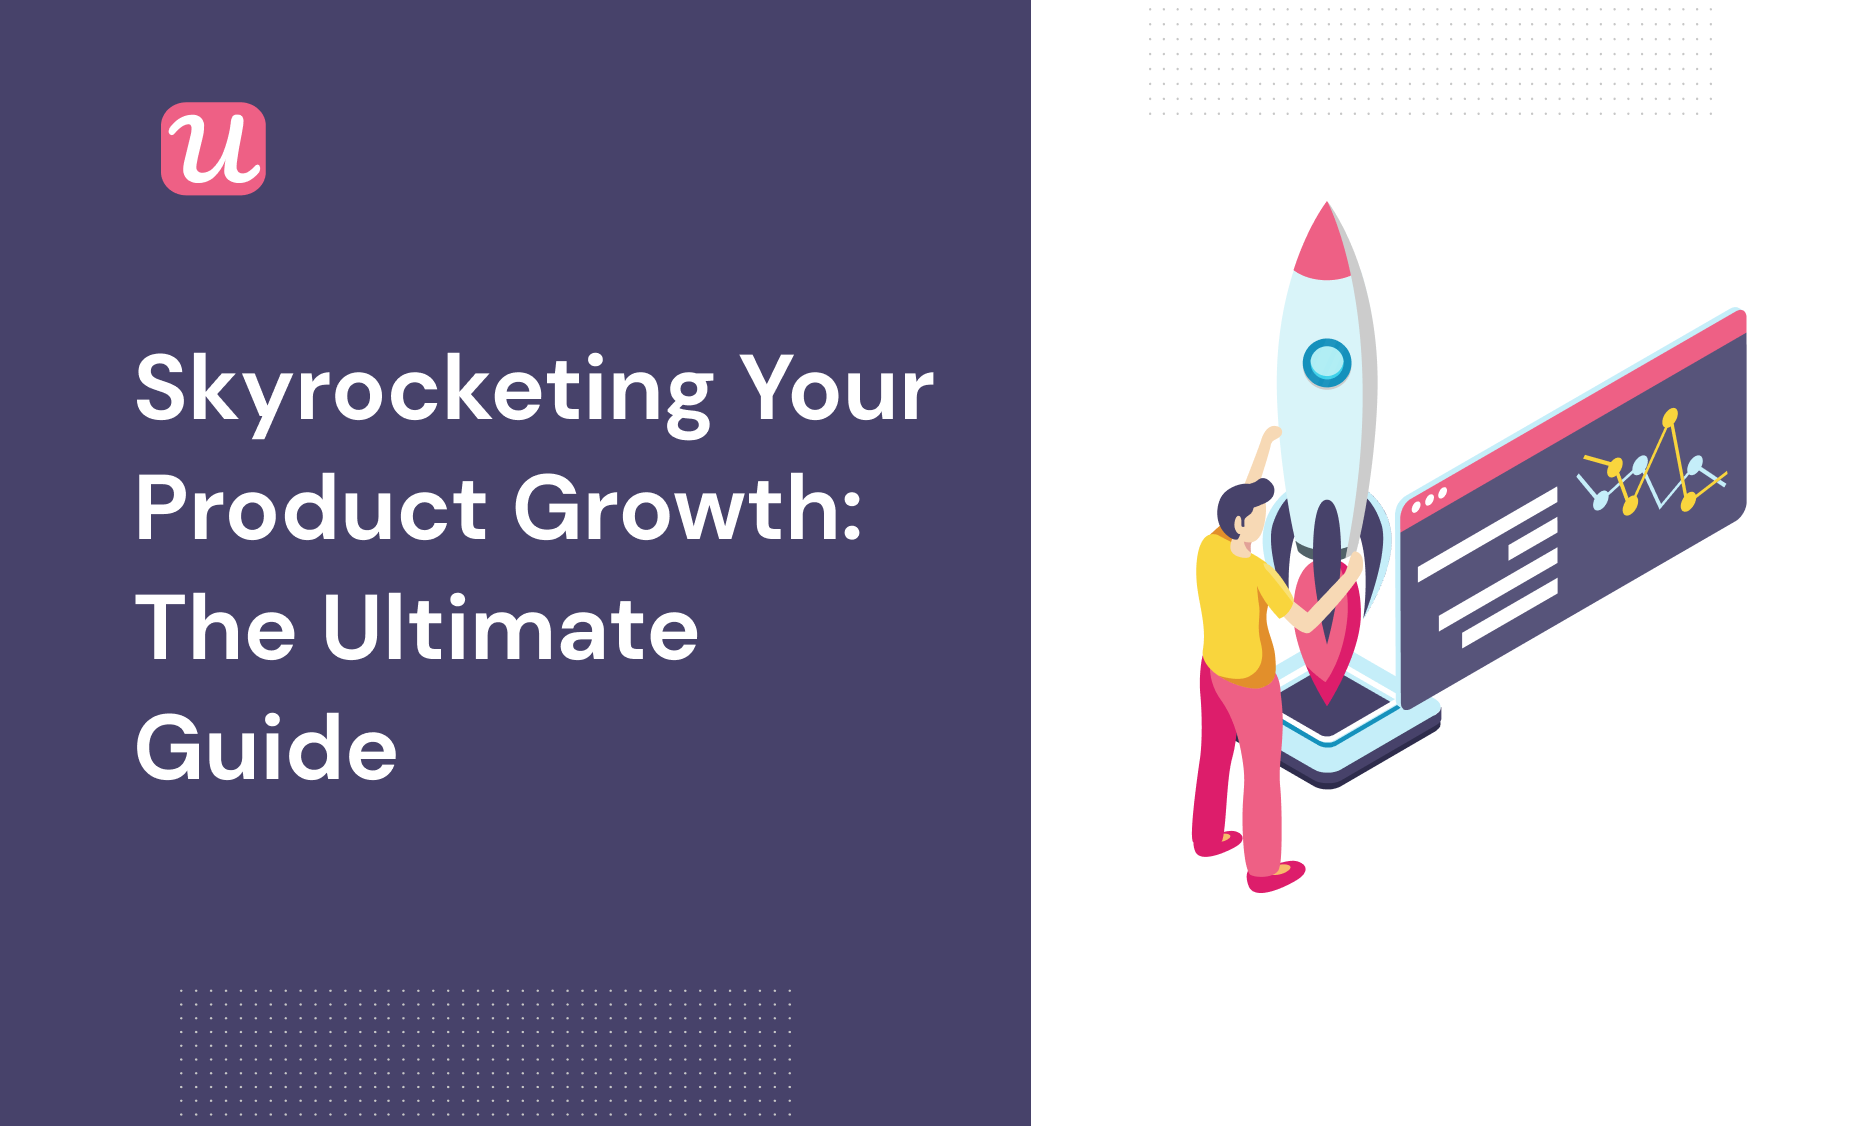 Skyrocketing Your Product Growth: The Ultimate Guide